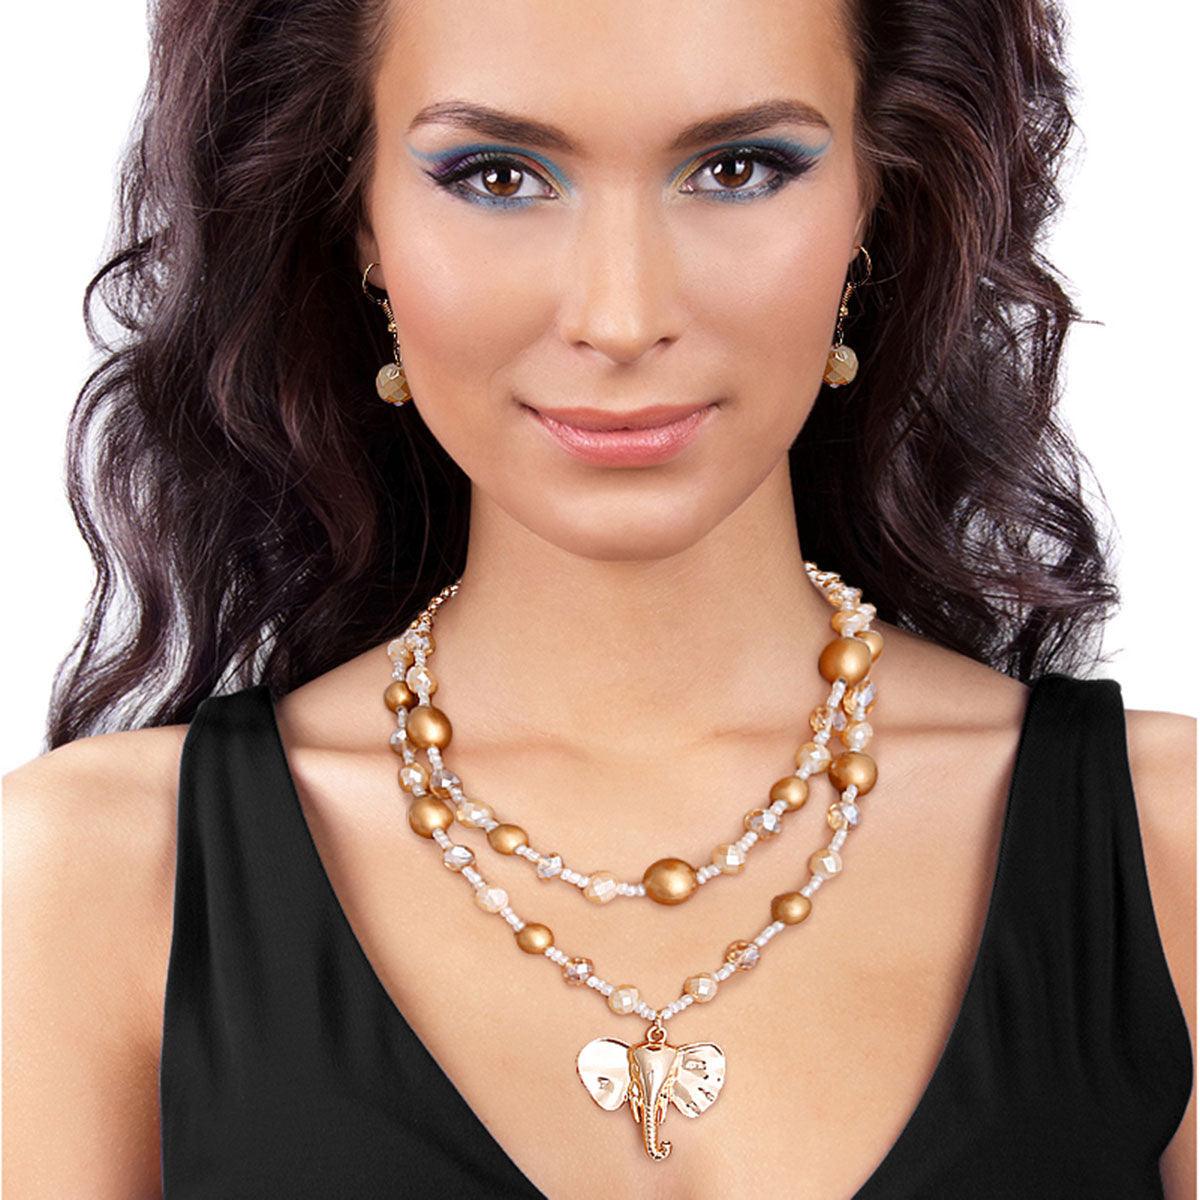 Get ready for a truckload of style with our Elephant Pendant Layered Necklace